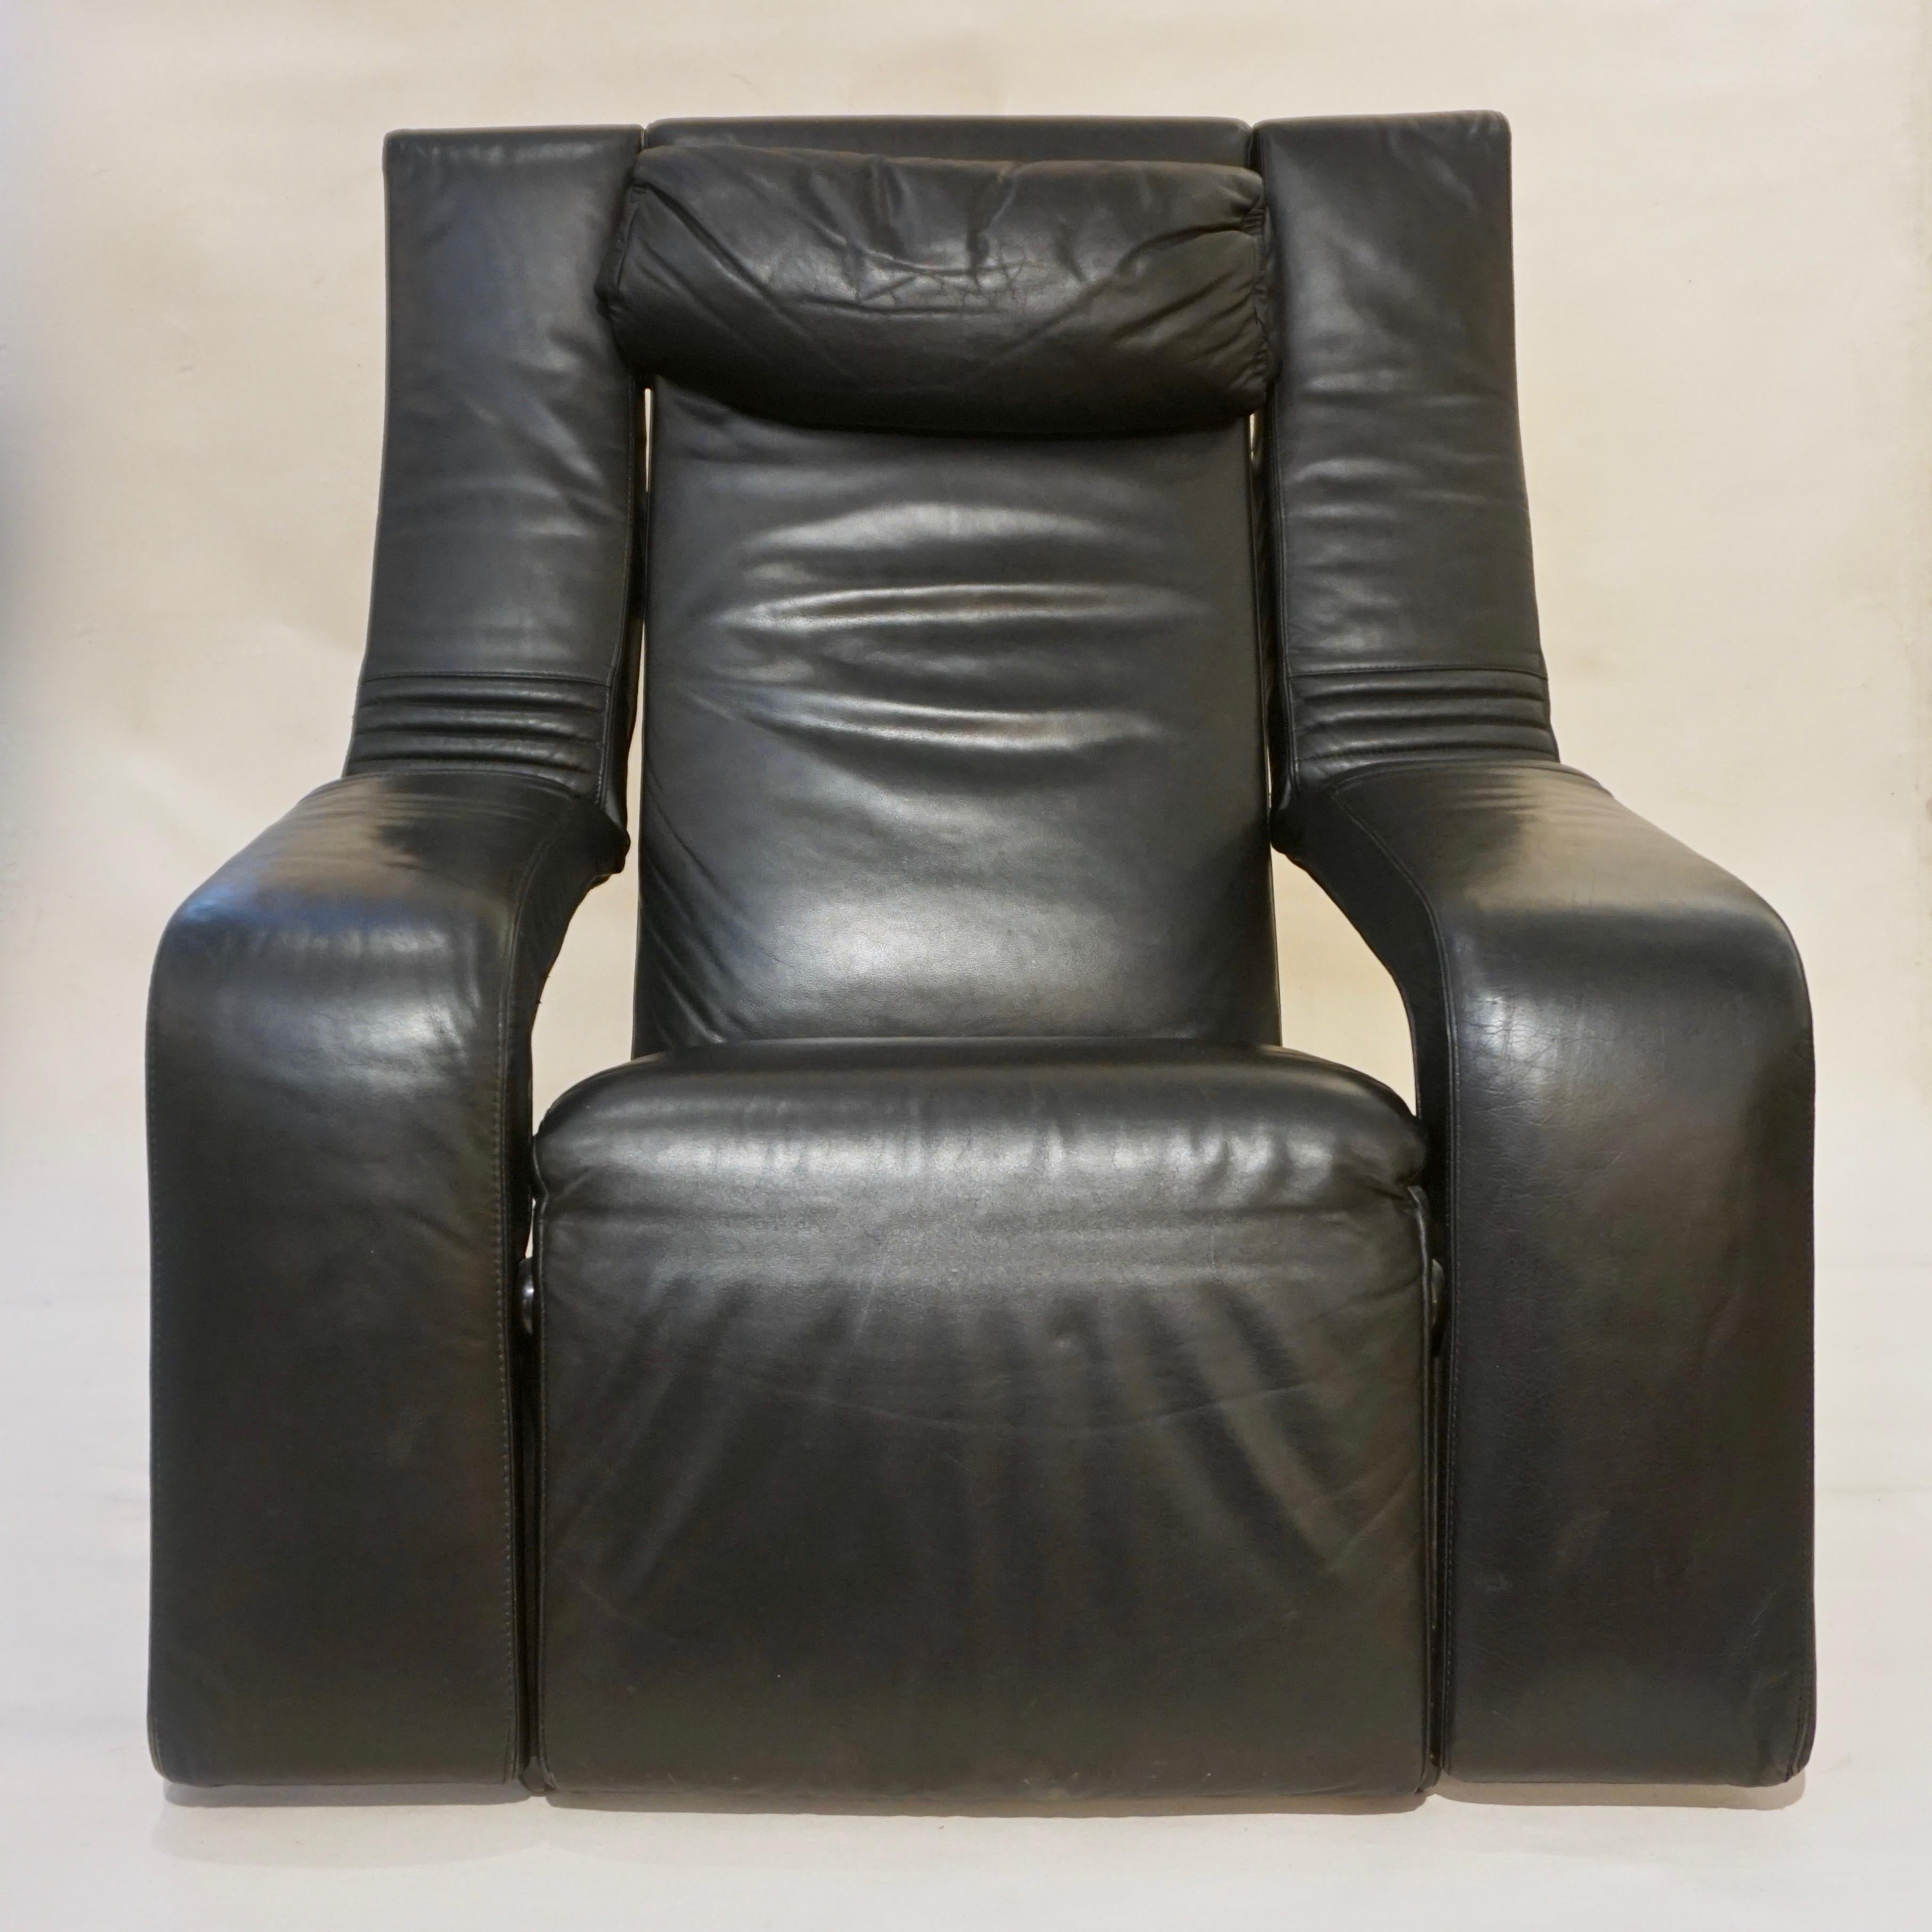 Vintage Italian fine design adjustable modern lounge armchair, historic streamlined organic design by Giampiero Vitelli & Titina Ammanati, model called Kilkis for Brunati designed in 1985, covered in its original smooth black leather in excellent